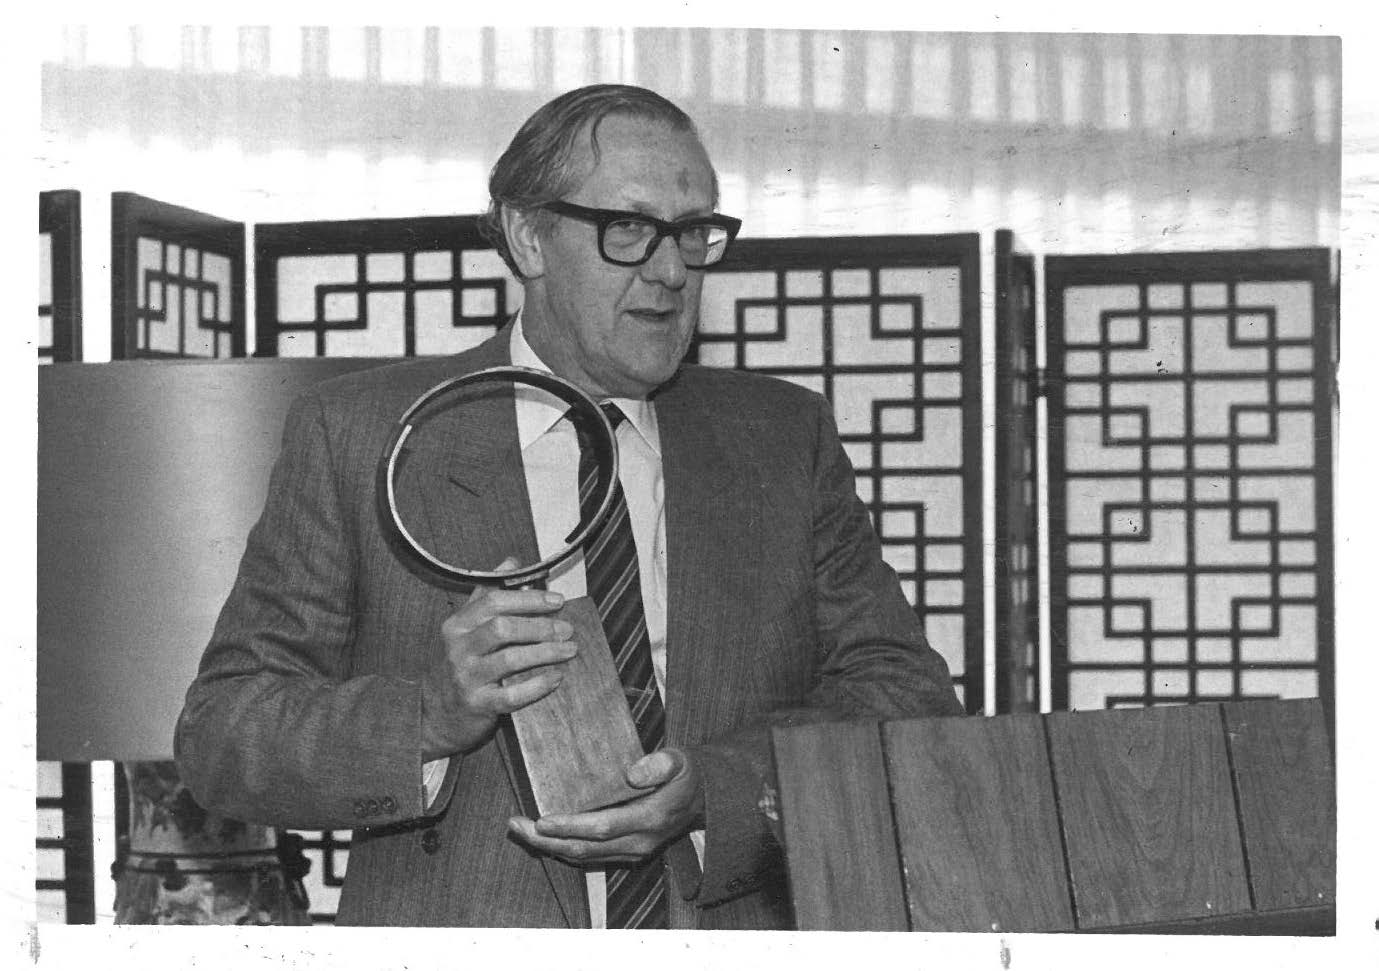 Brian Aldiss accepting the John W. Campbell Memorial Award for Helliconia Spring, Lawrence, KS, 1983.